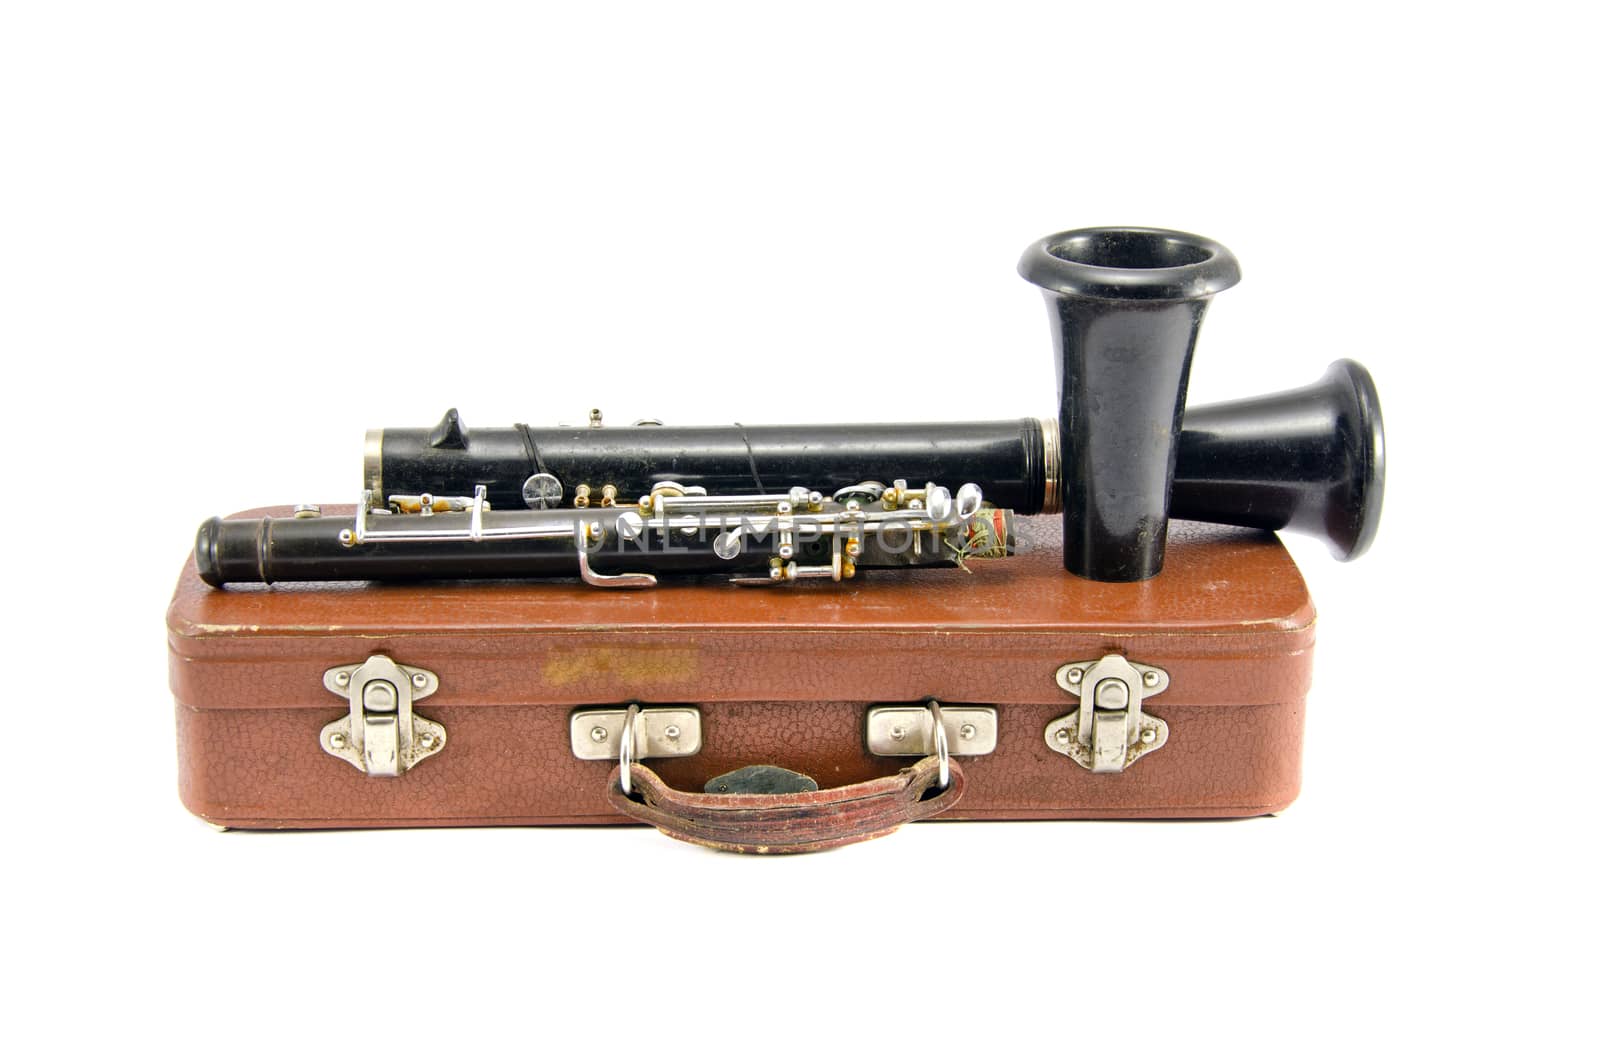 old used clarinet on brown leather box isolated on white background. Musical instrument